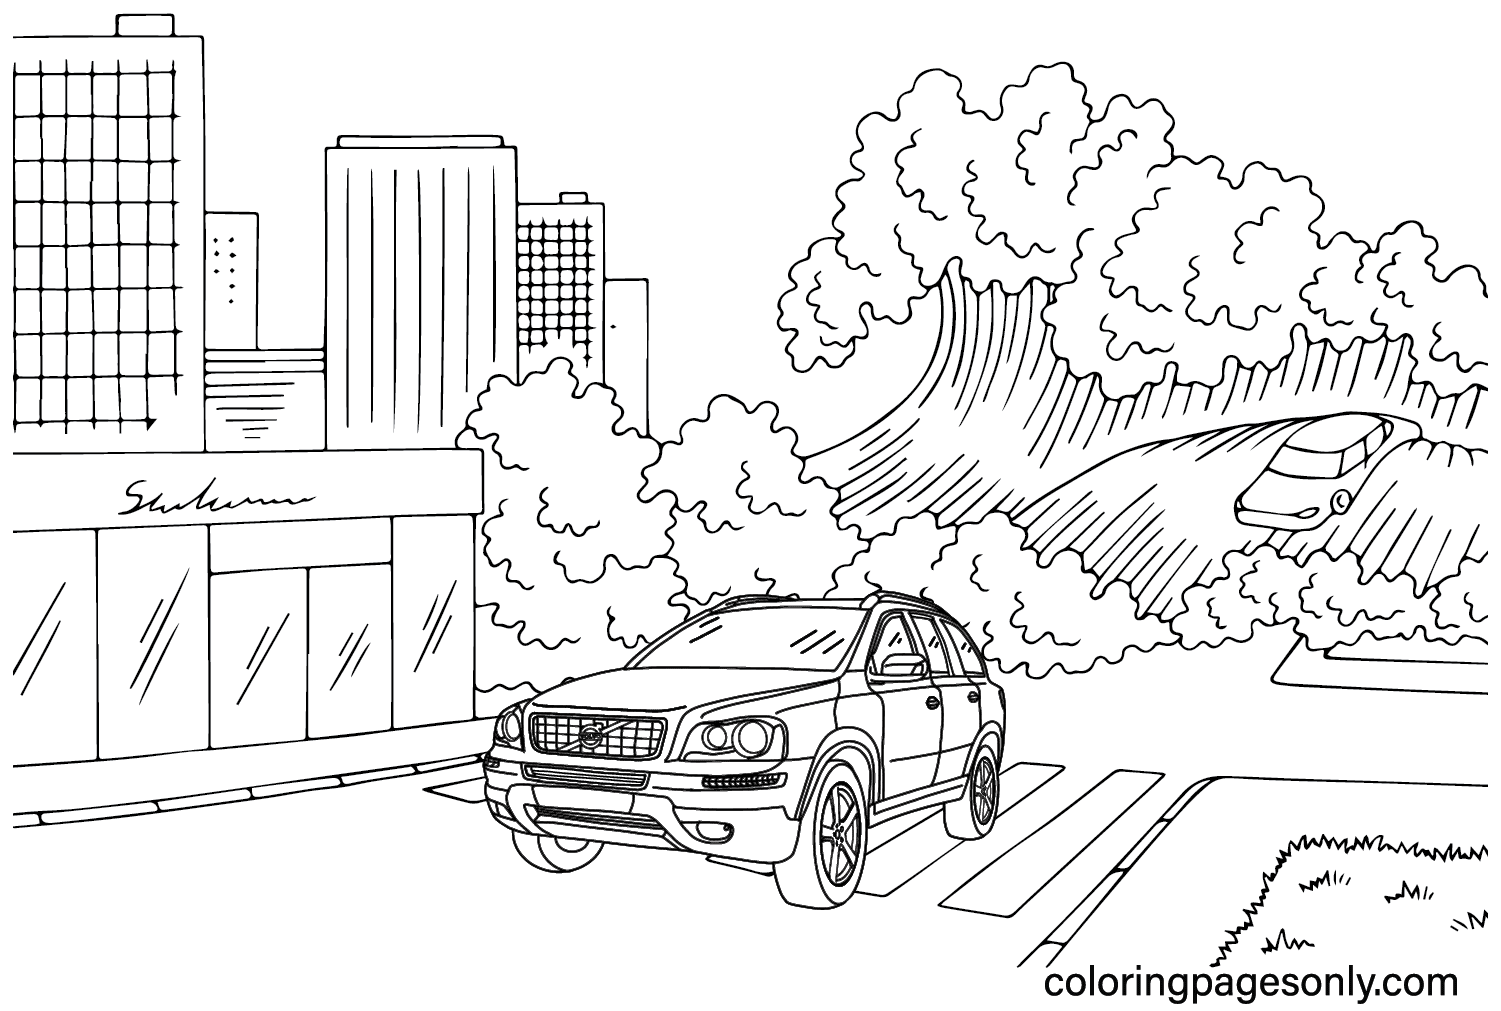 Volvo XC90 Coloring Page Free  Volvo Coloring Pages  Coloring Pages